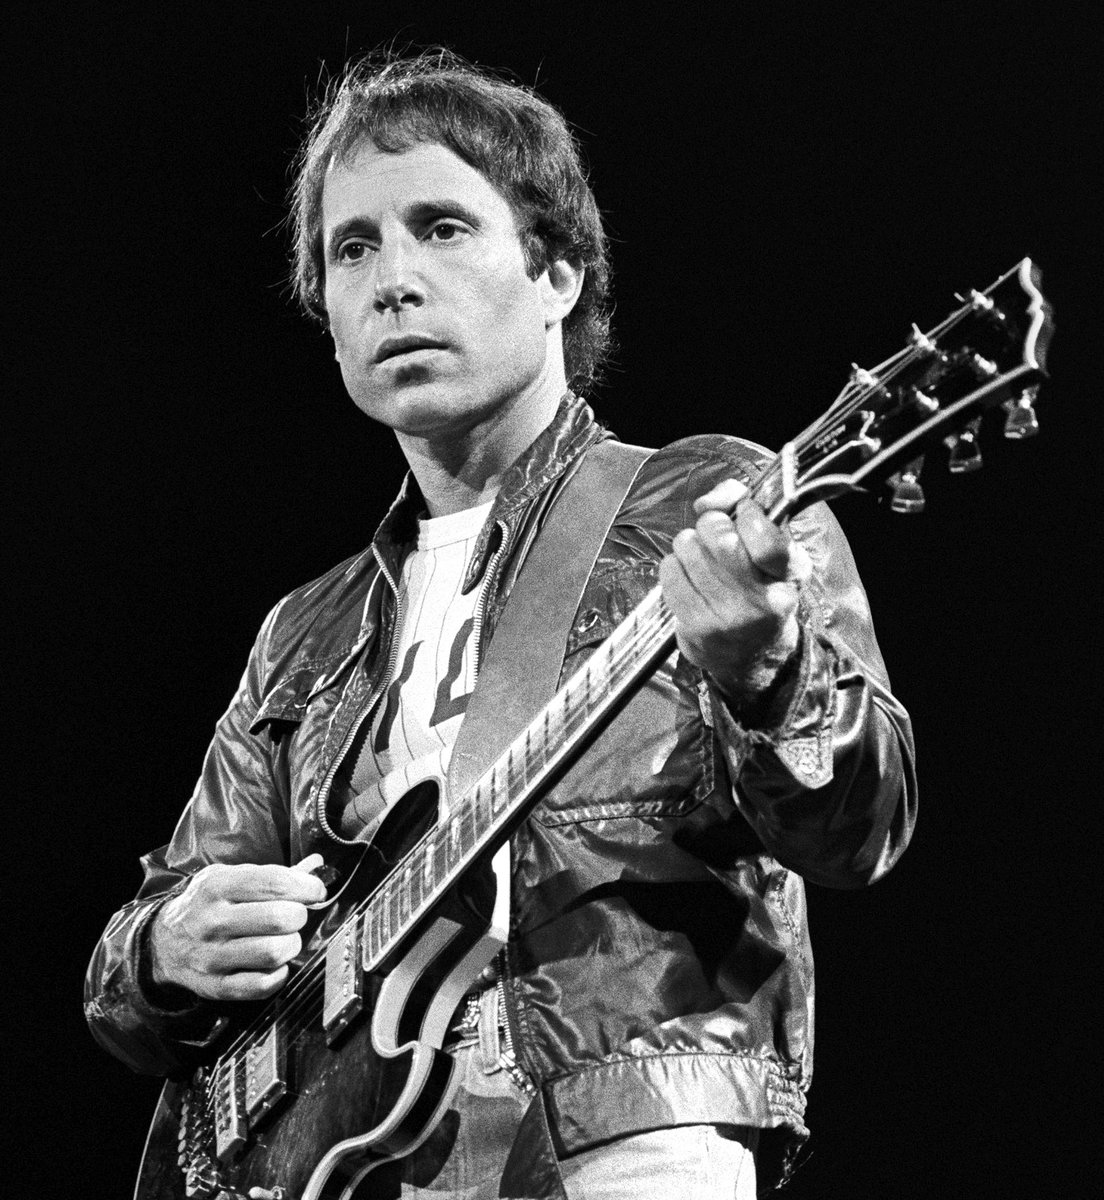 Homeward Bound: A Grammy Salute to the Songs of @paulsimonofficial! See a special tribute concert celebrating the legendary 16-time Grammy–winning singer-songwriter with performances by Simon himself. bit.ly/PaulSimon_CBS December 21st on @CBS and @paramountplus